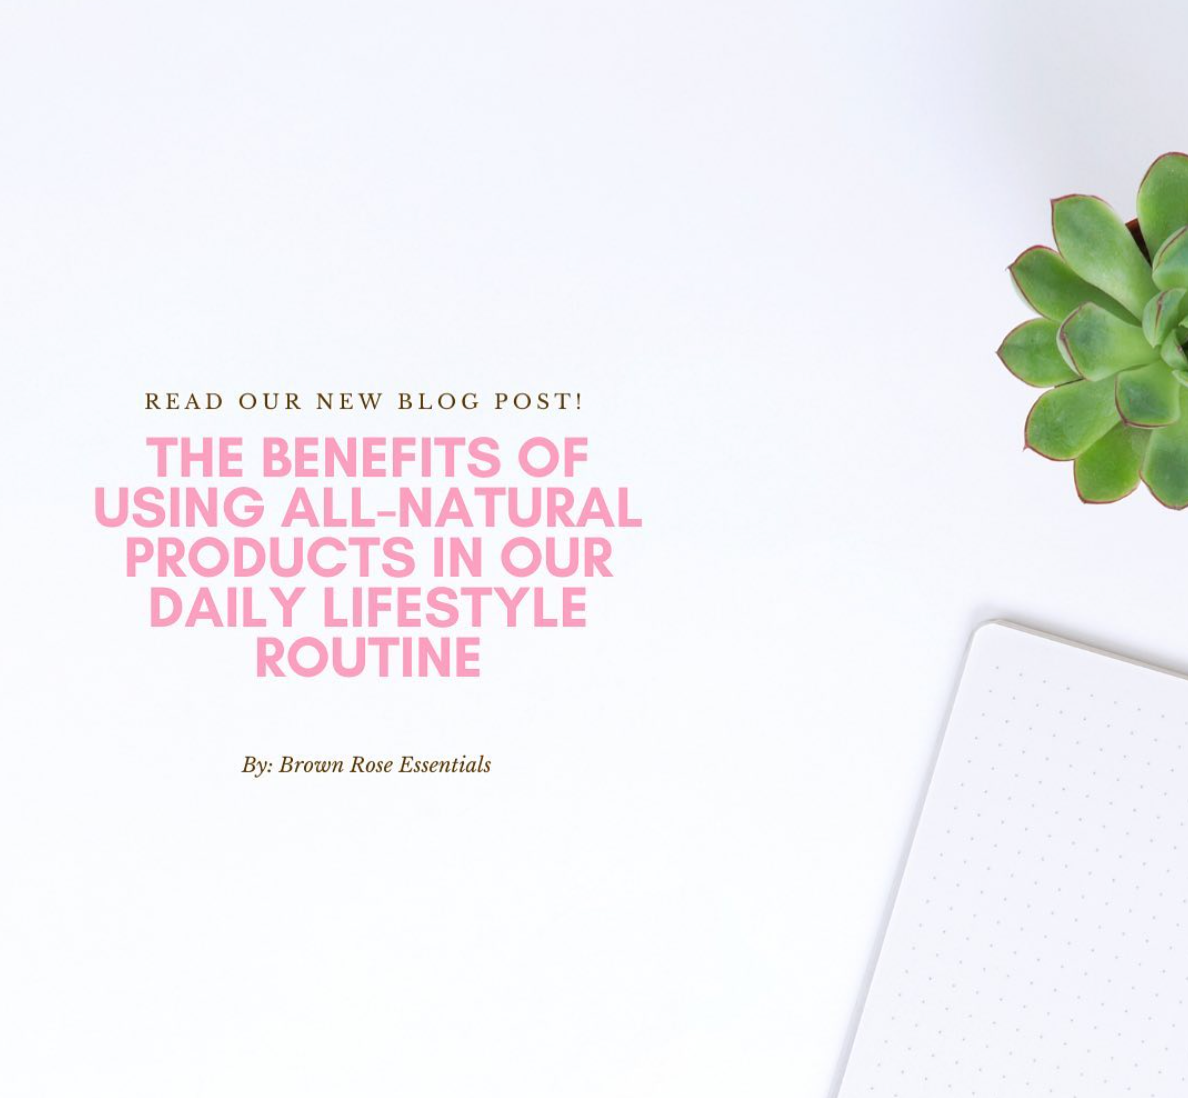 The Benefits Of Using All-Natural Products In Our Daily Lifestyle Routines